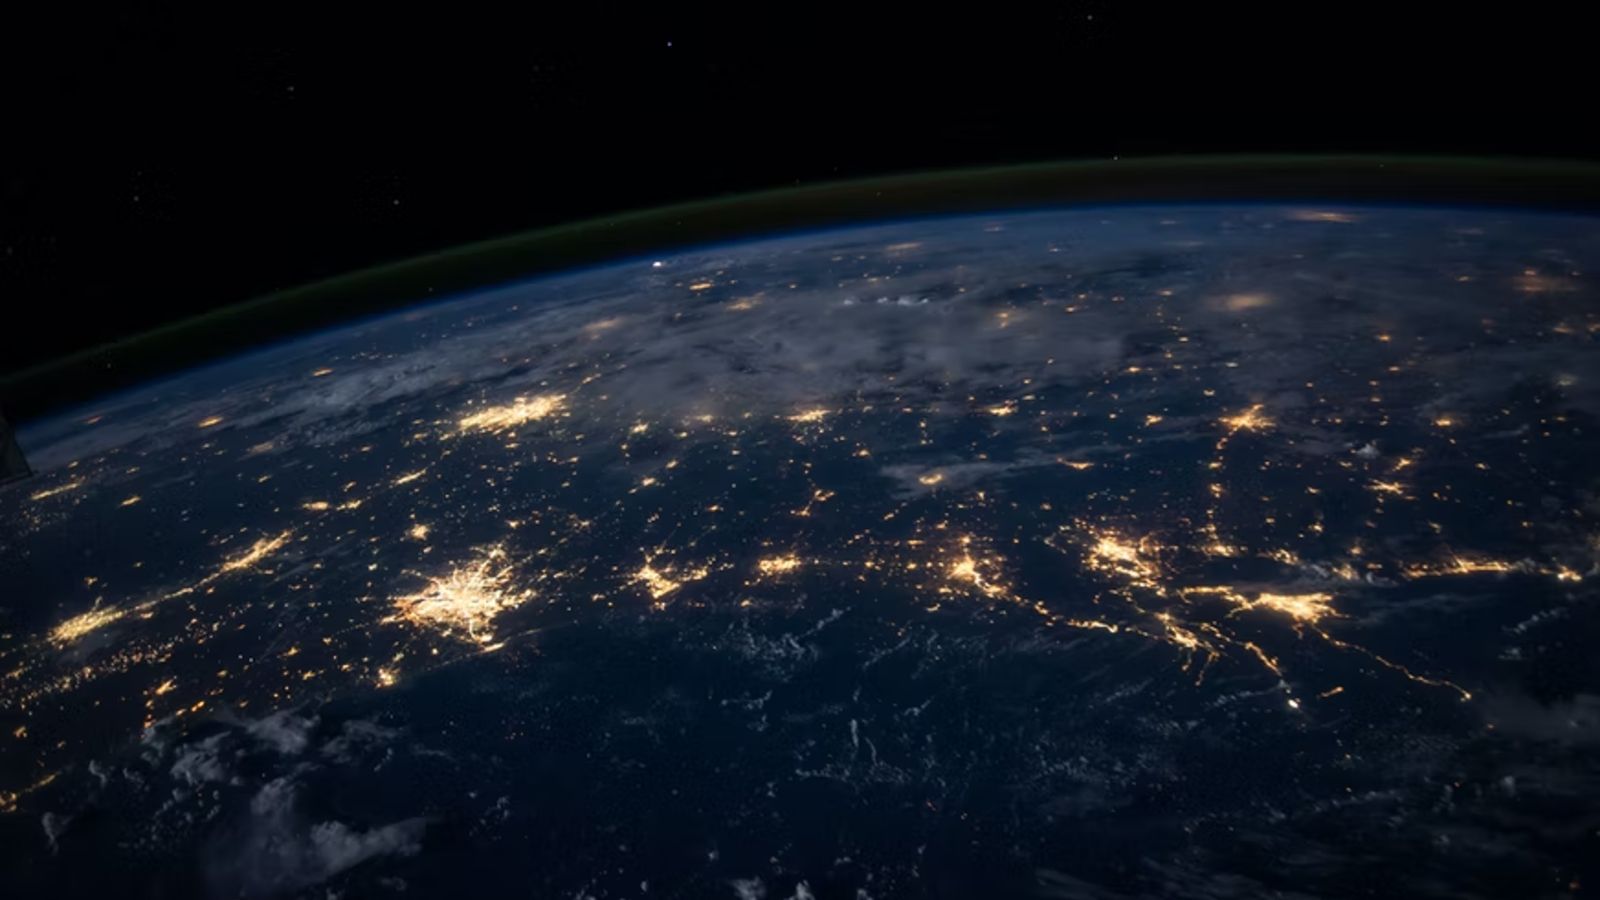 Image of earth from outer space showing a network of lights